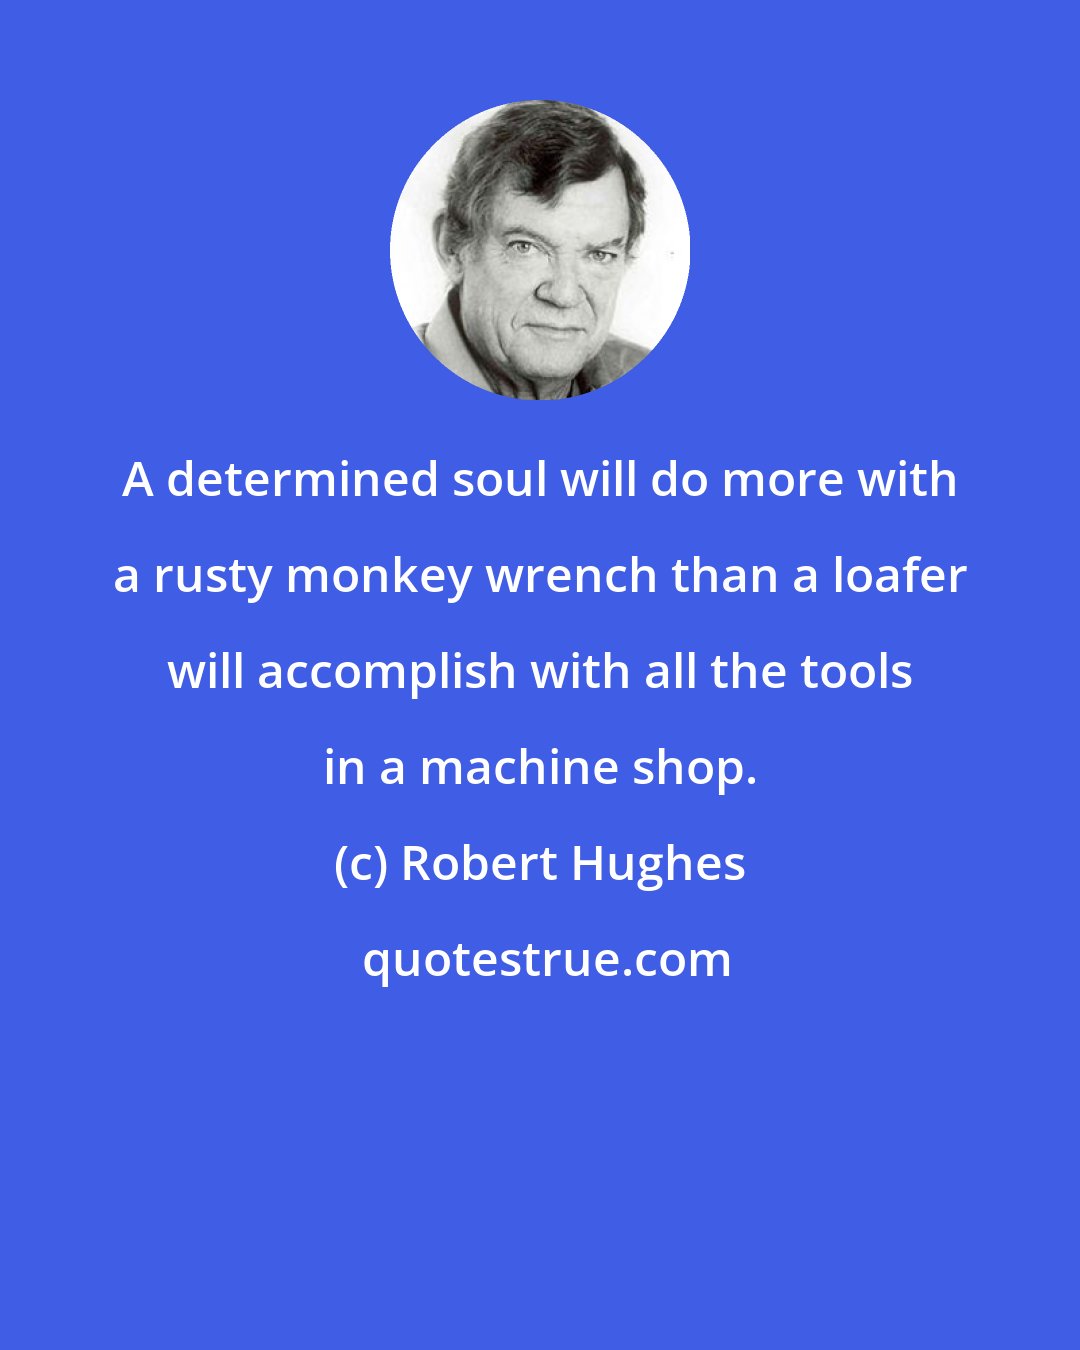 Robert Hughes: A determined soul will do more with a rusty monkey wrench than a loafer will accomplish with all the tools in a machine shop.